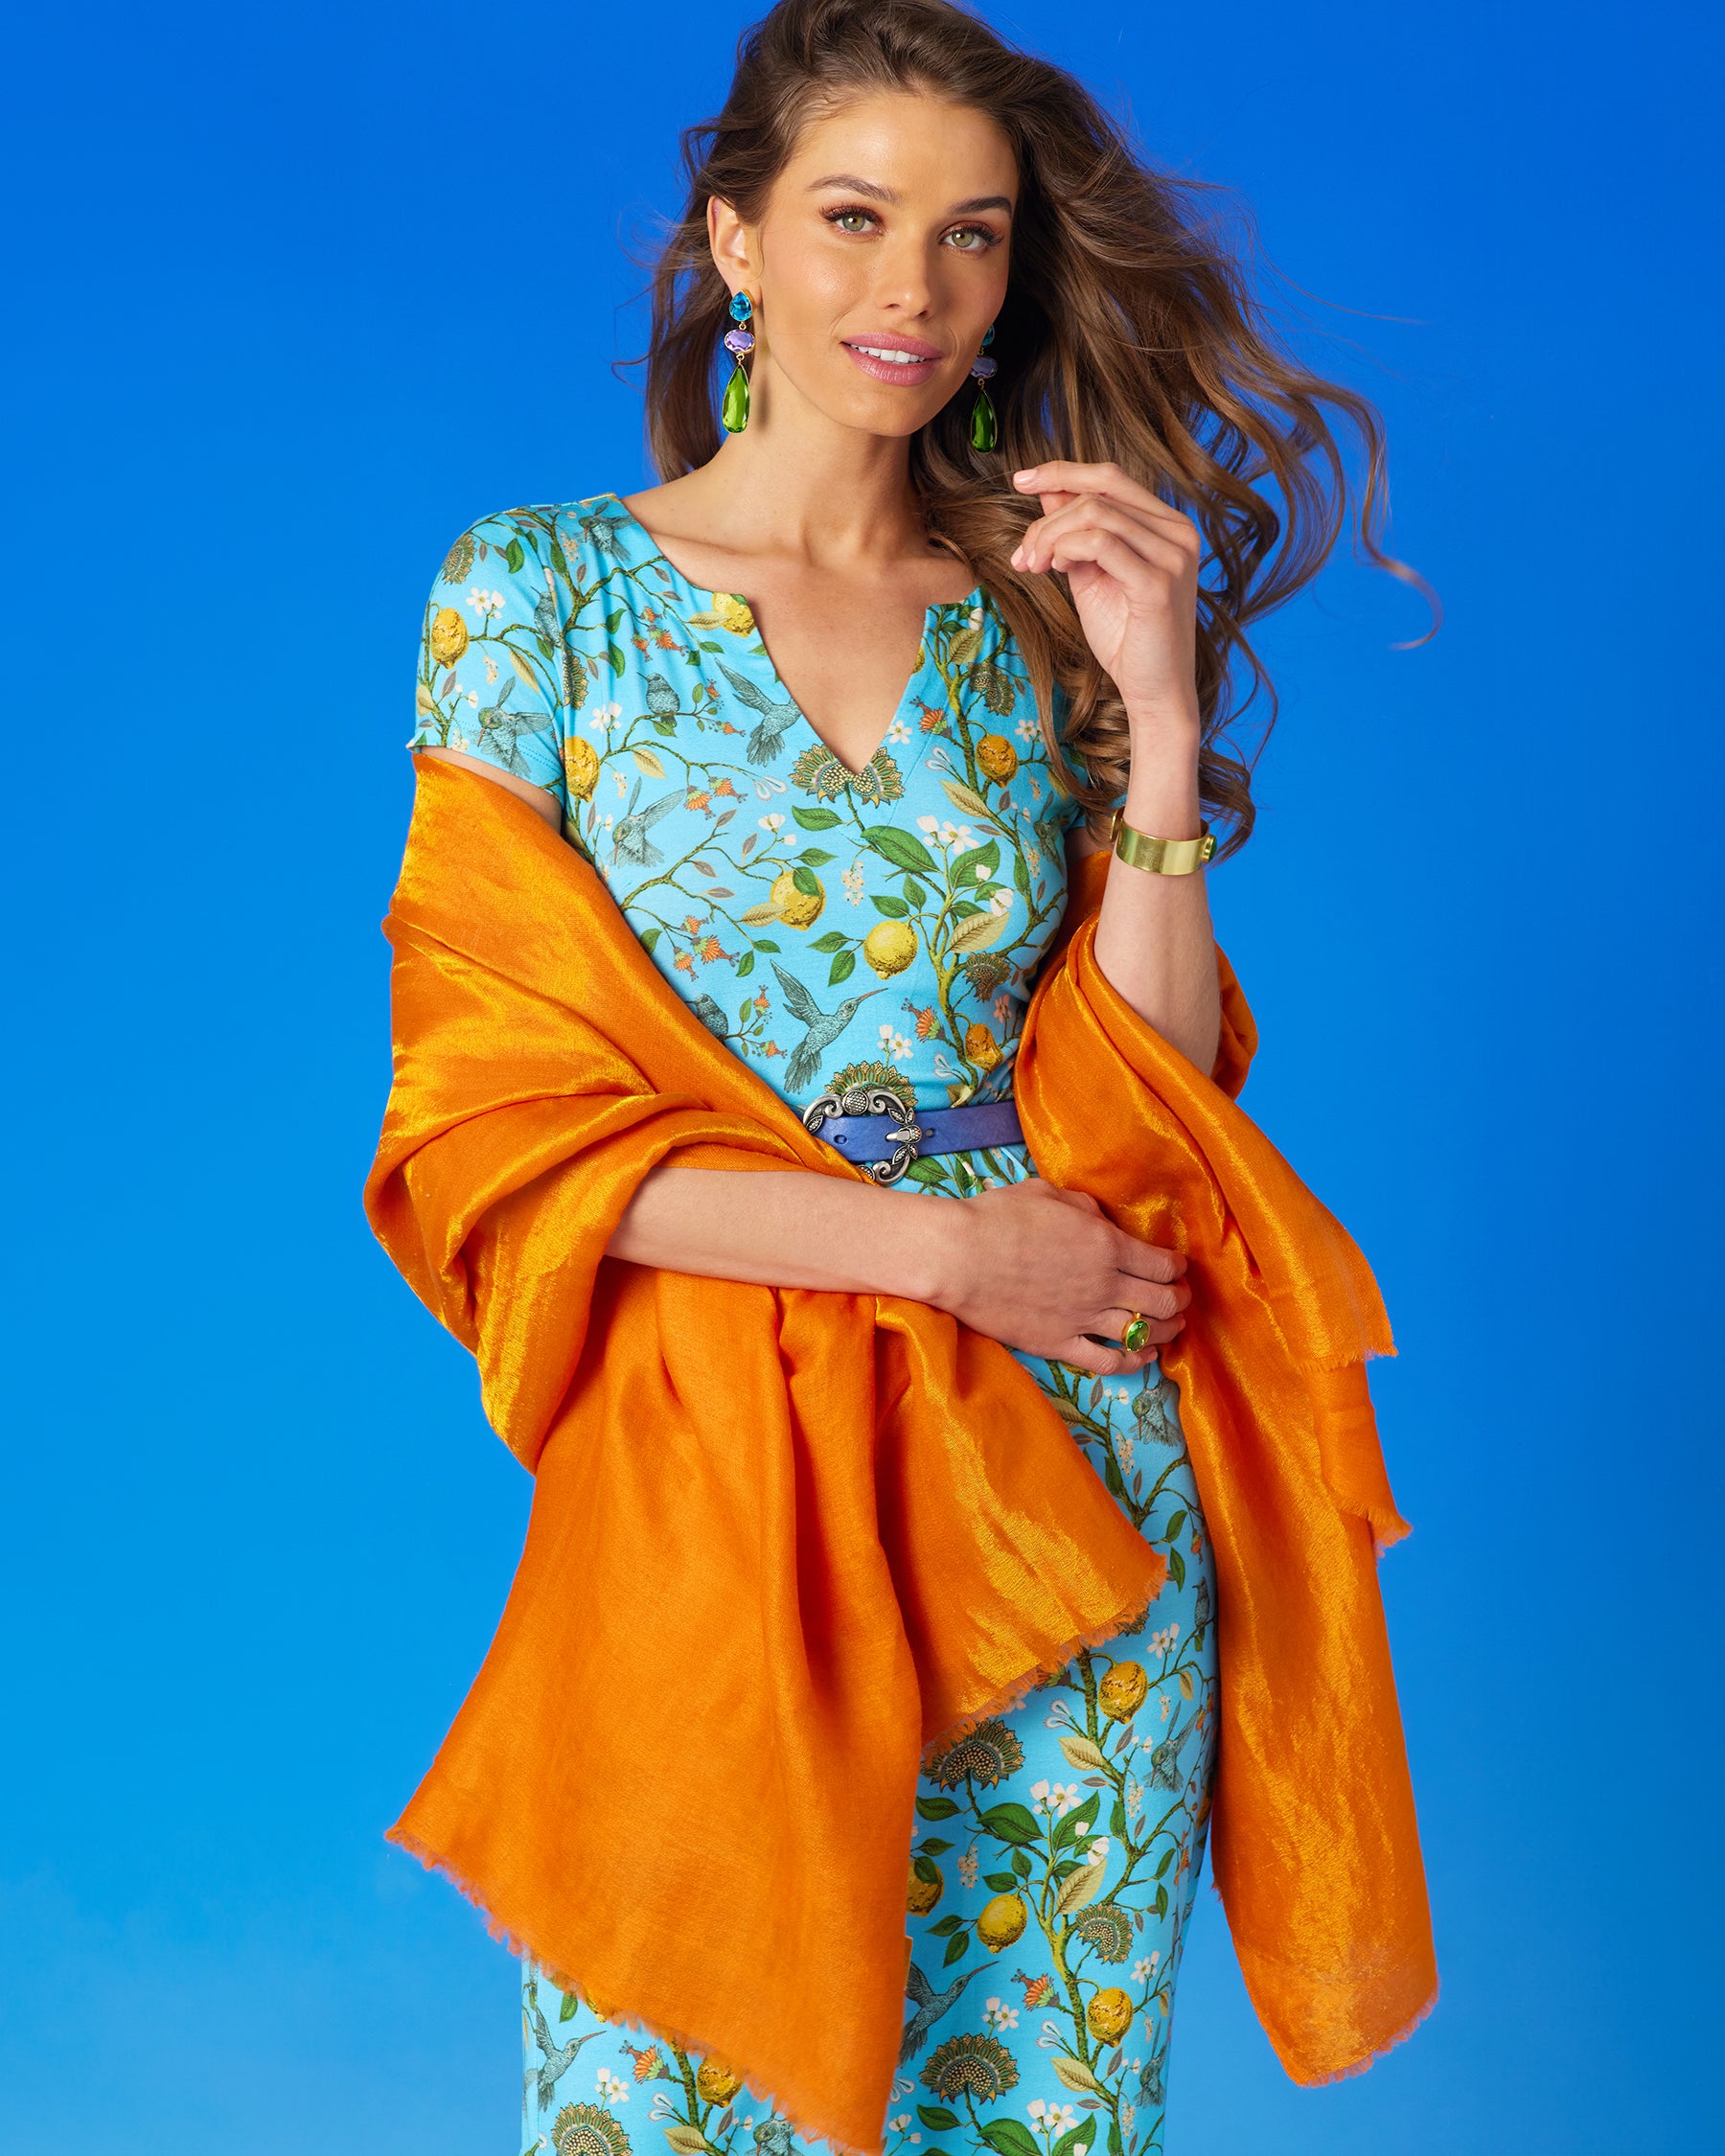 Flora Long Stretch Dress in Turquoise Hummingbird Print worn with the Josephine Pashmina Shawl